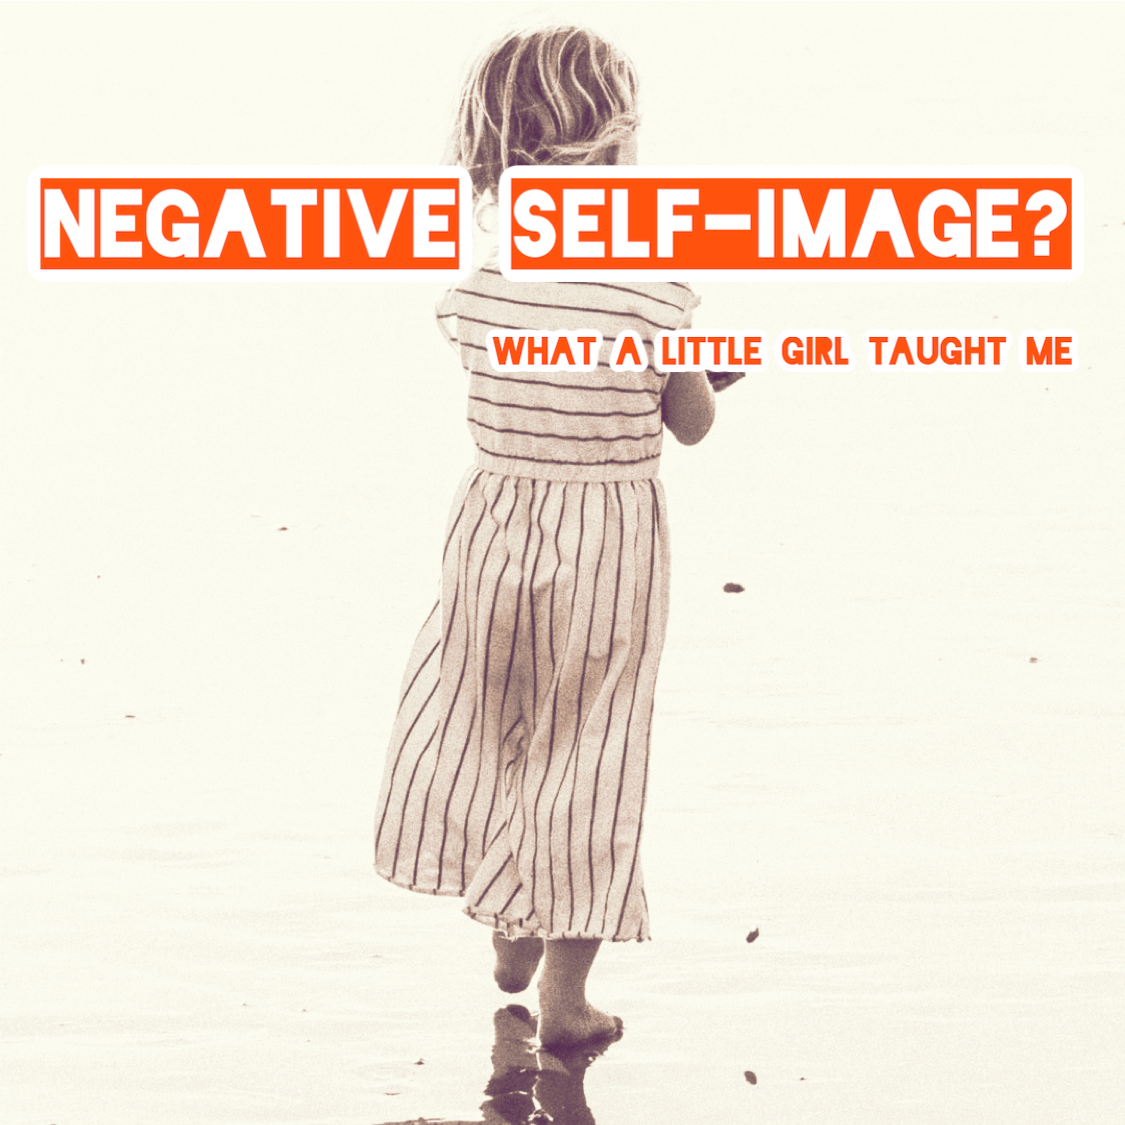 027: Negative self-image? What a little girl taught me